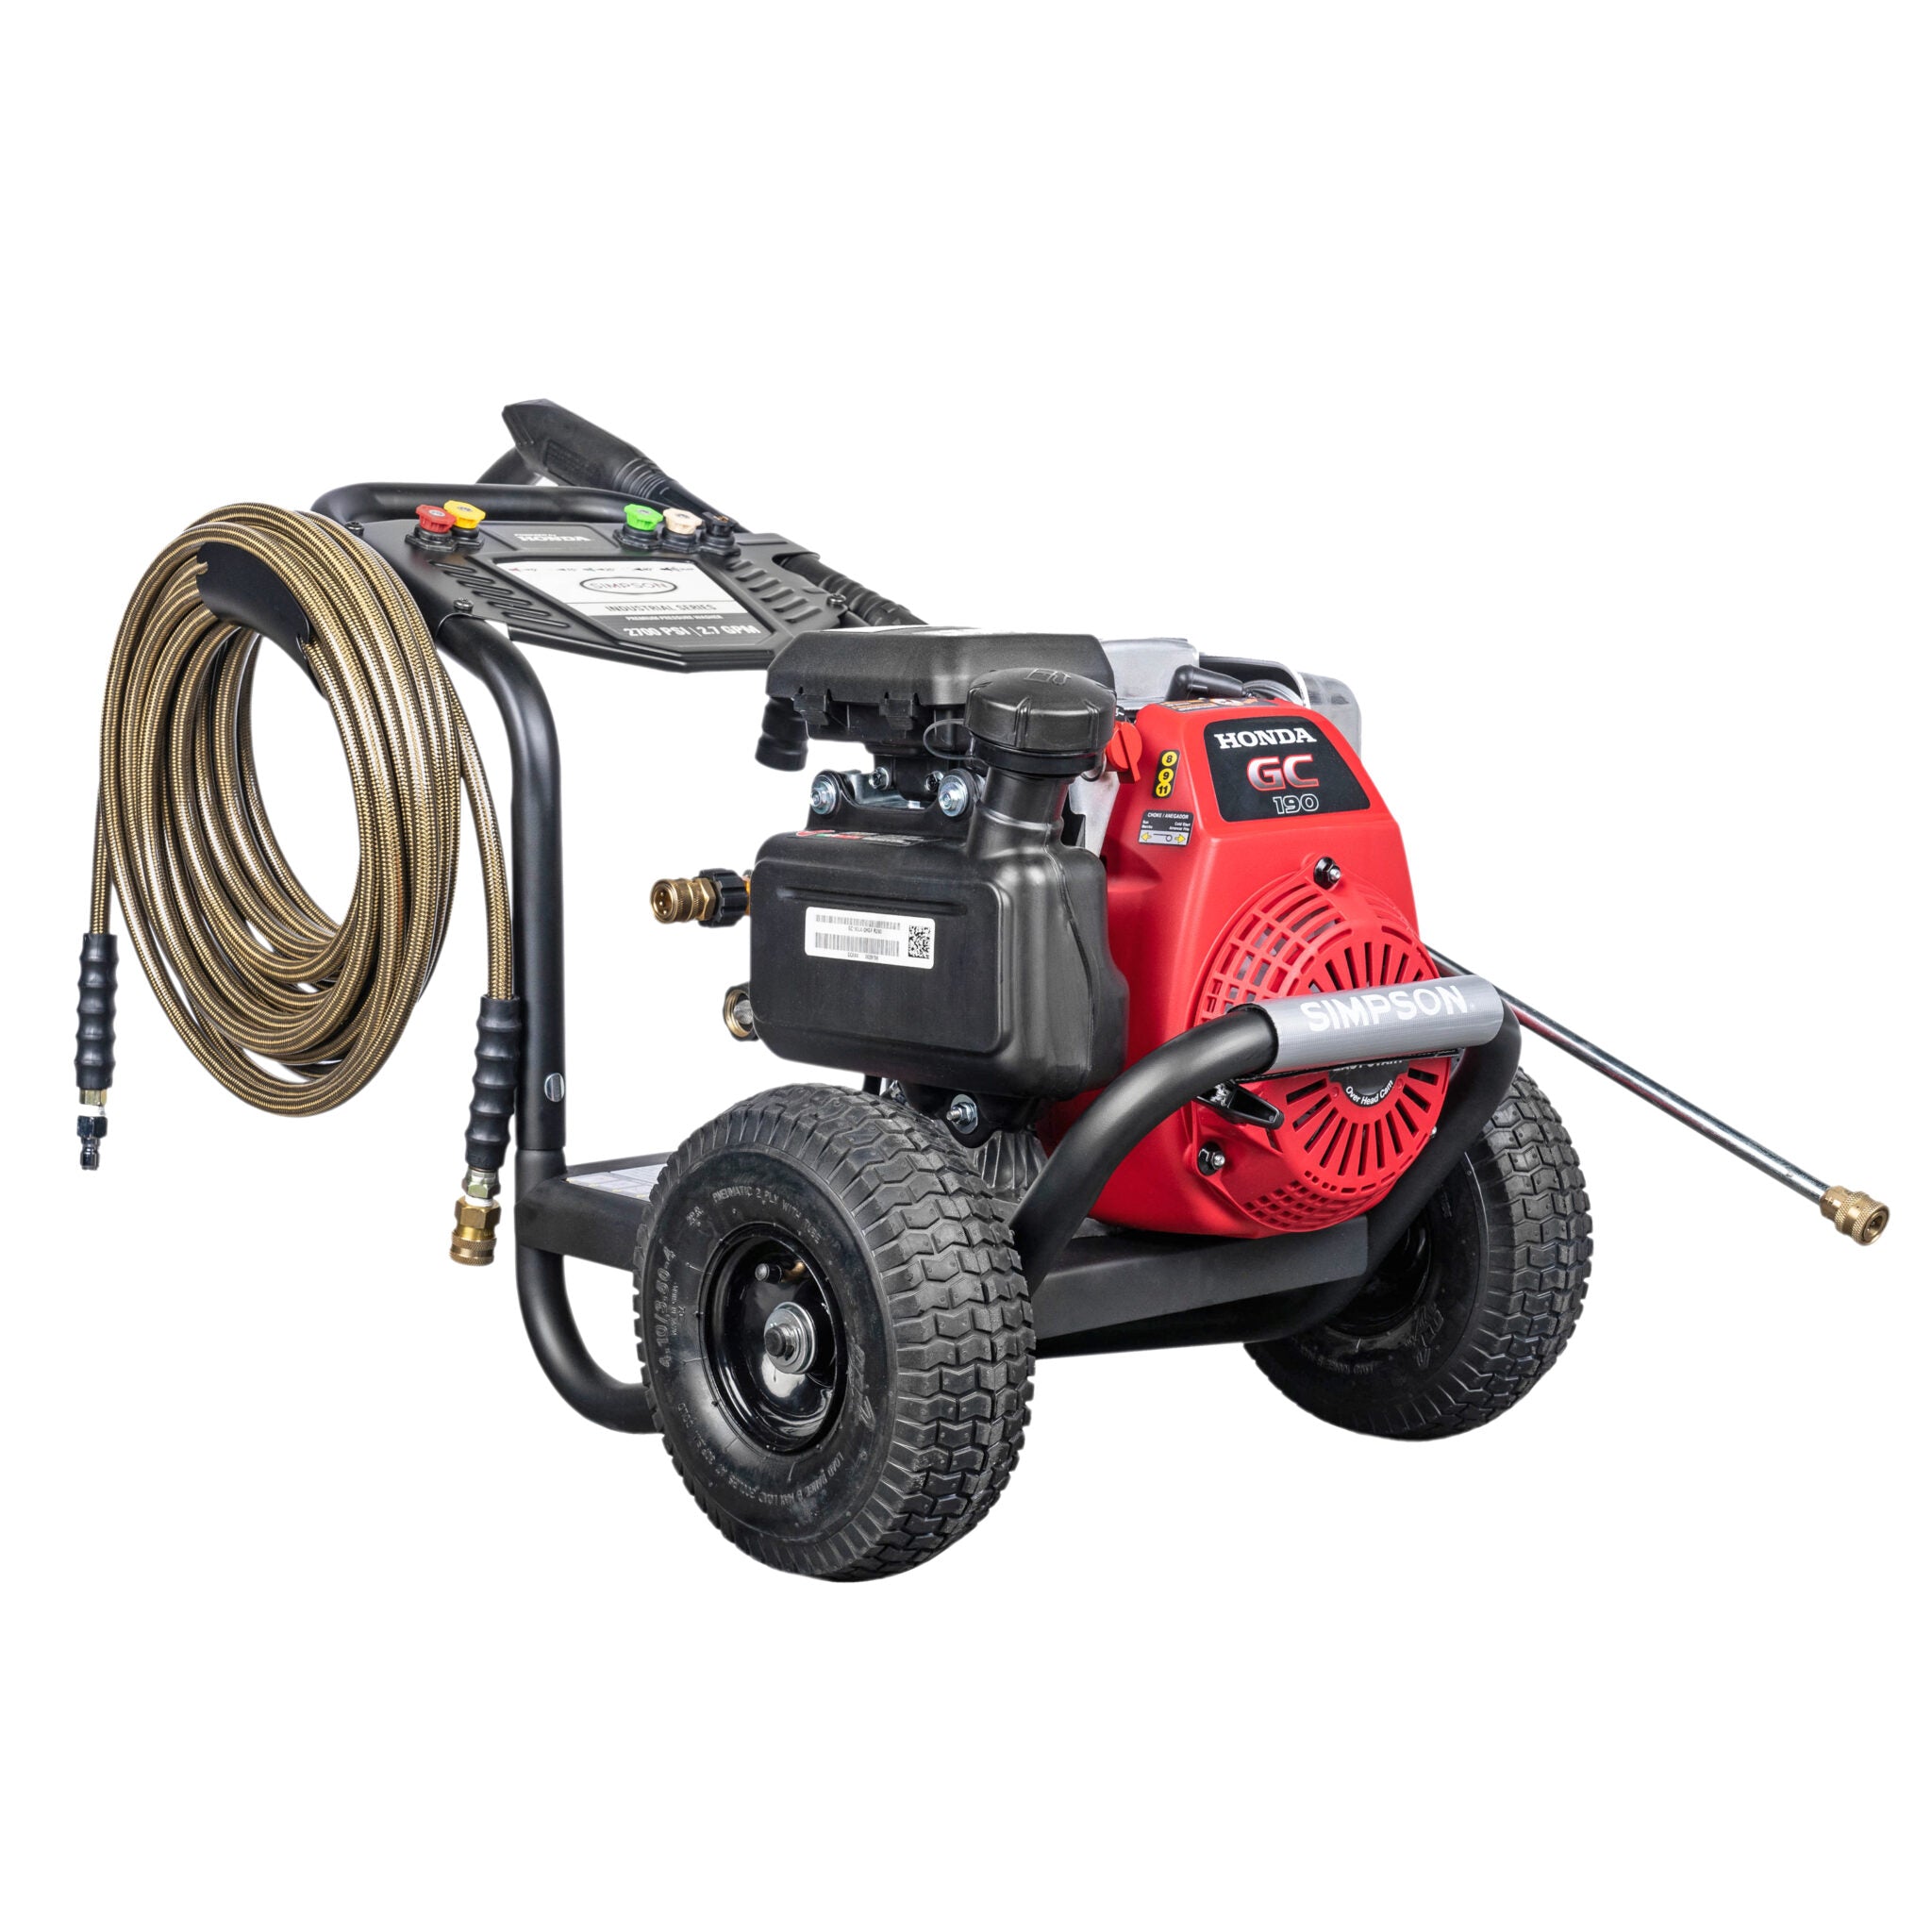 Simpson Industrial IS61023 2700-PSI Gas Pressure Washer with Honda GC190 Engine